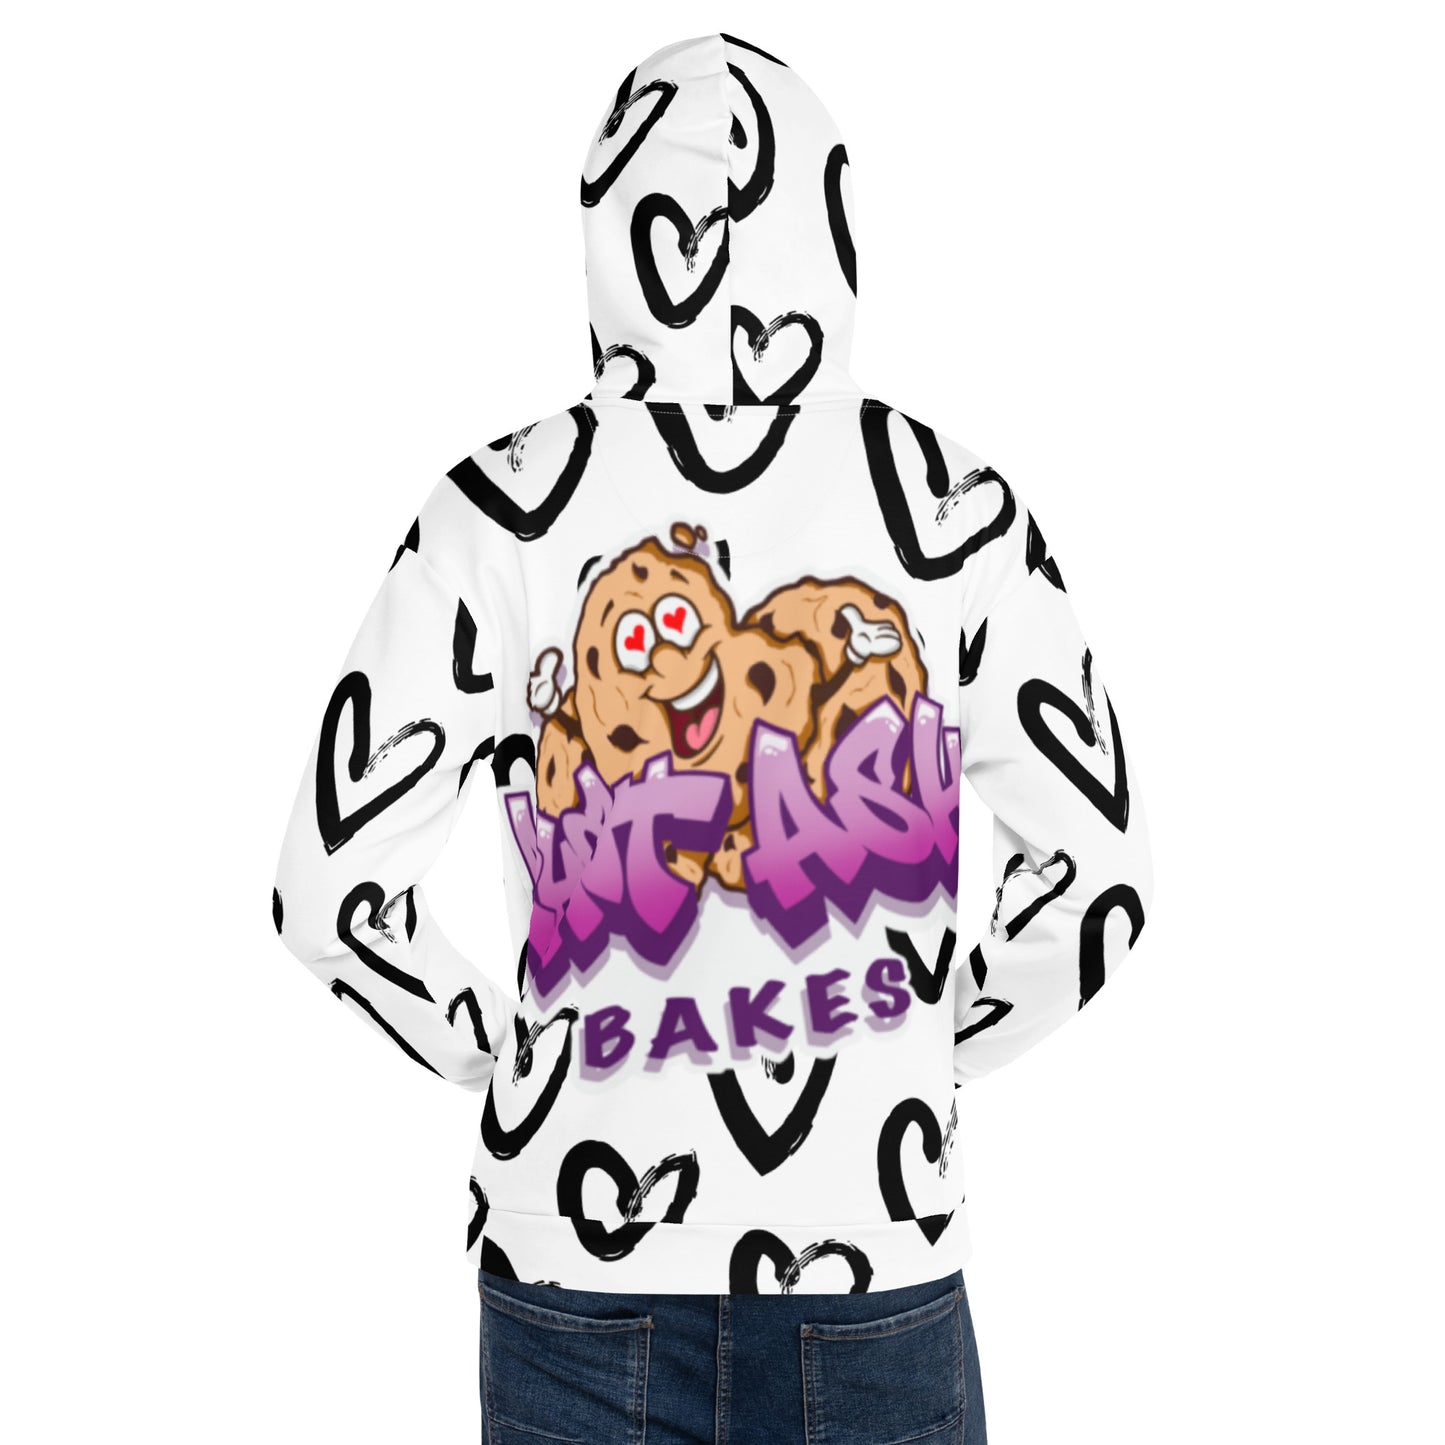 THIS Hoodie Love by Ron "This.1" Rivera